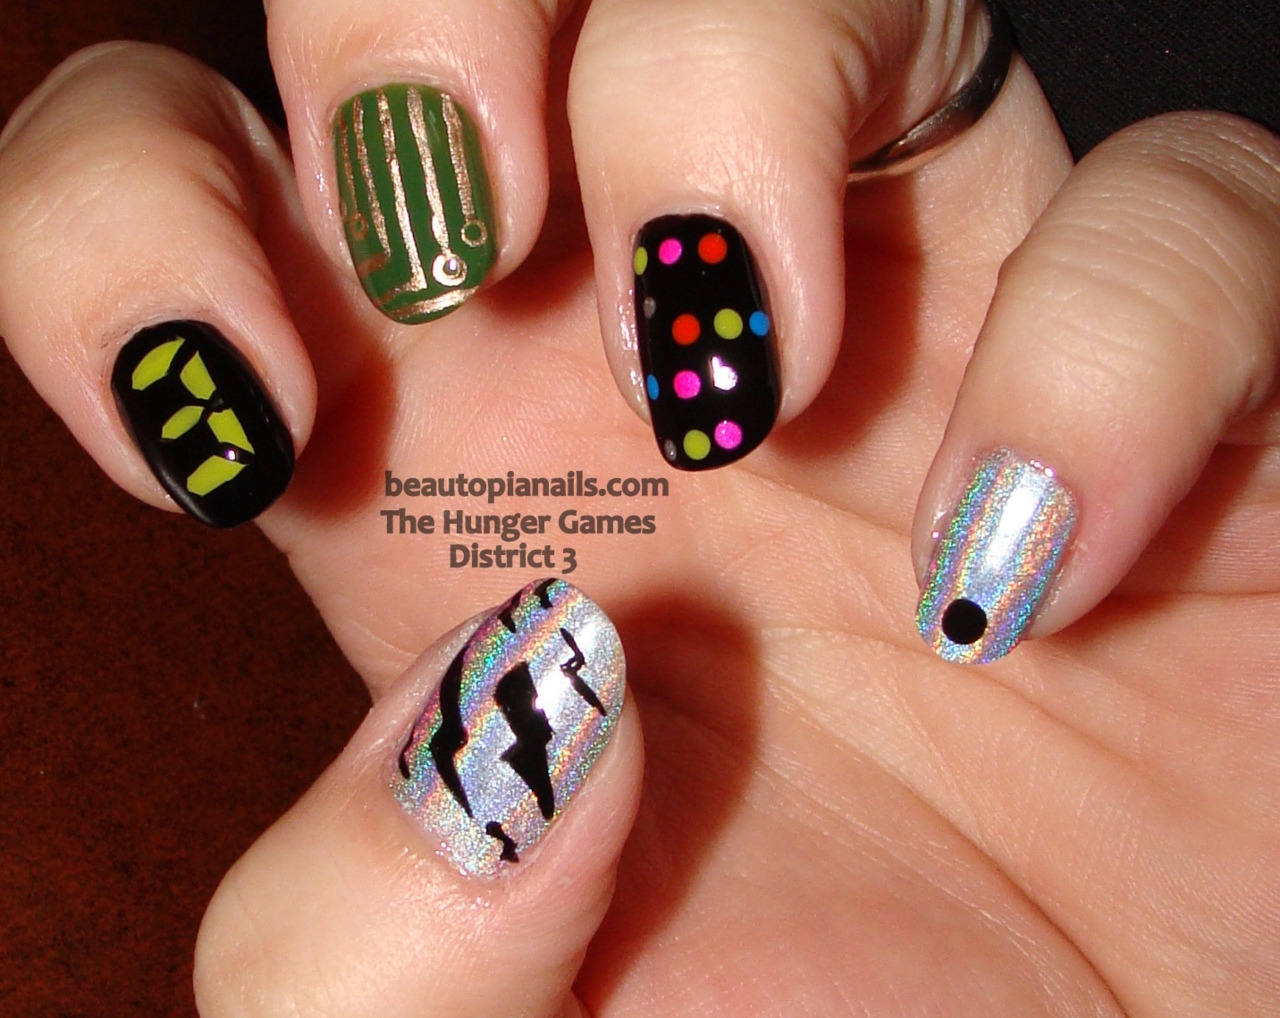 Hunger Games  District 3  continuation of the Hunger Games nail art 